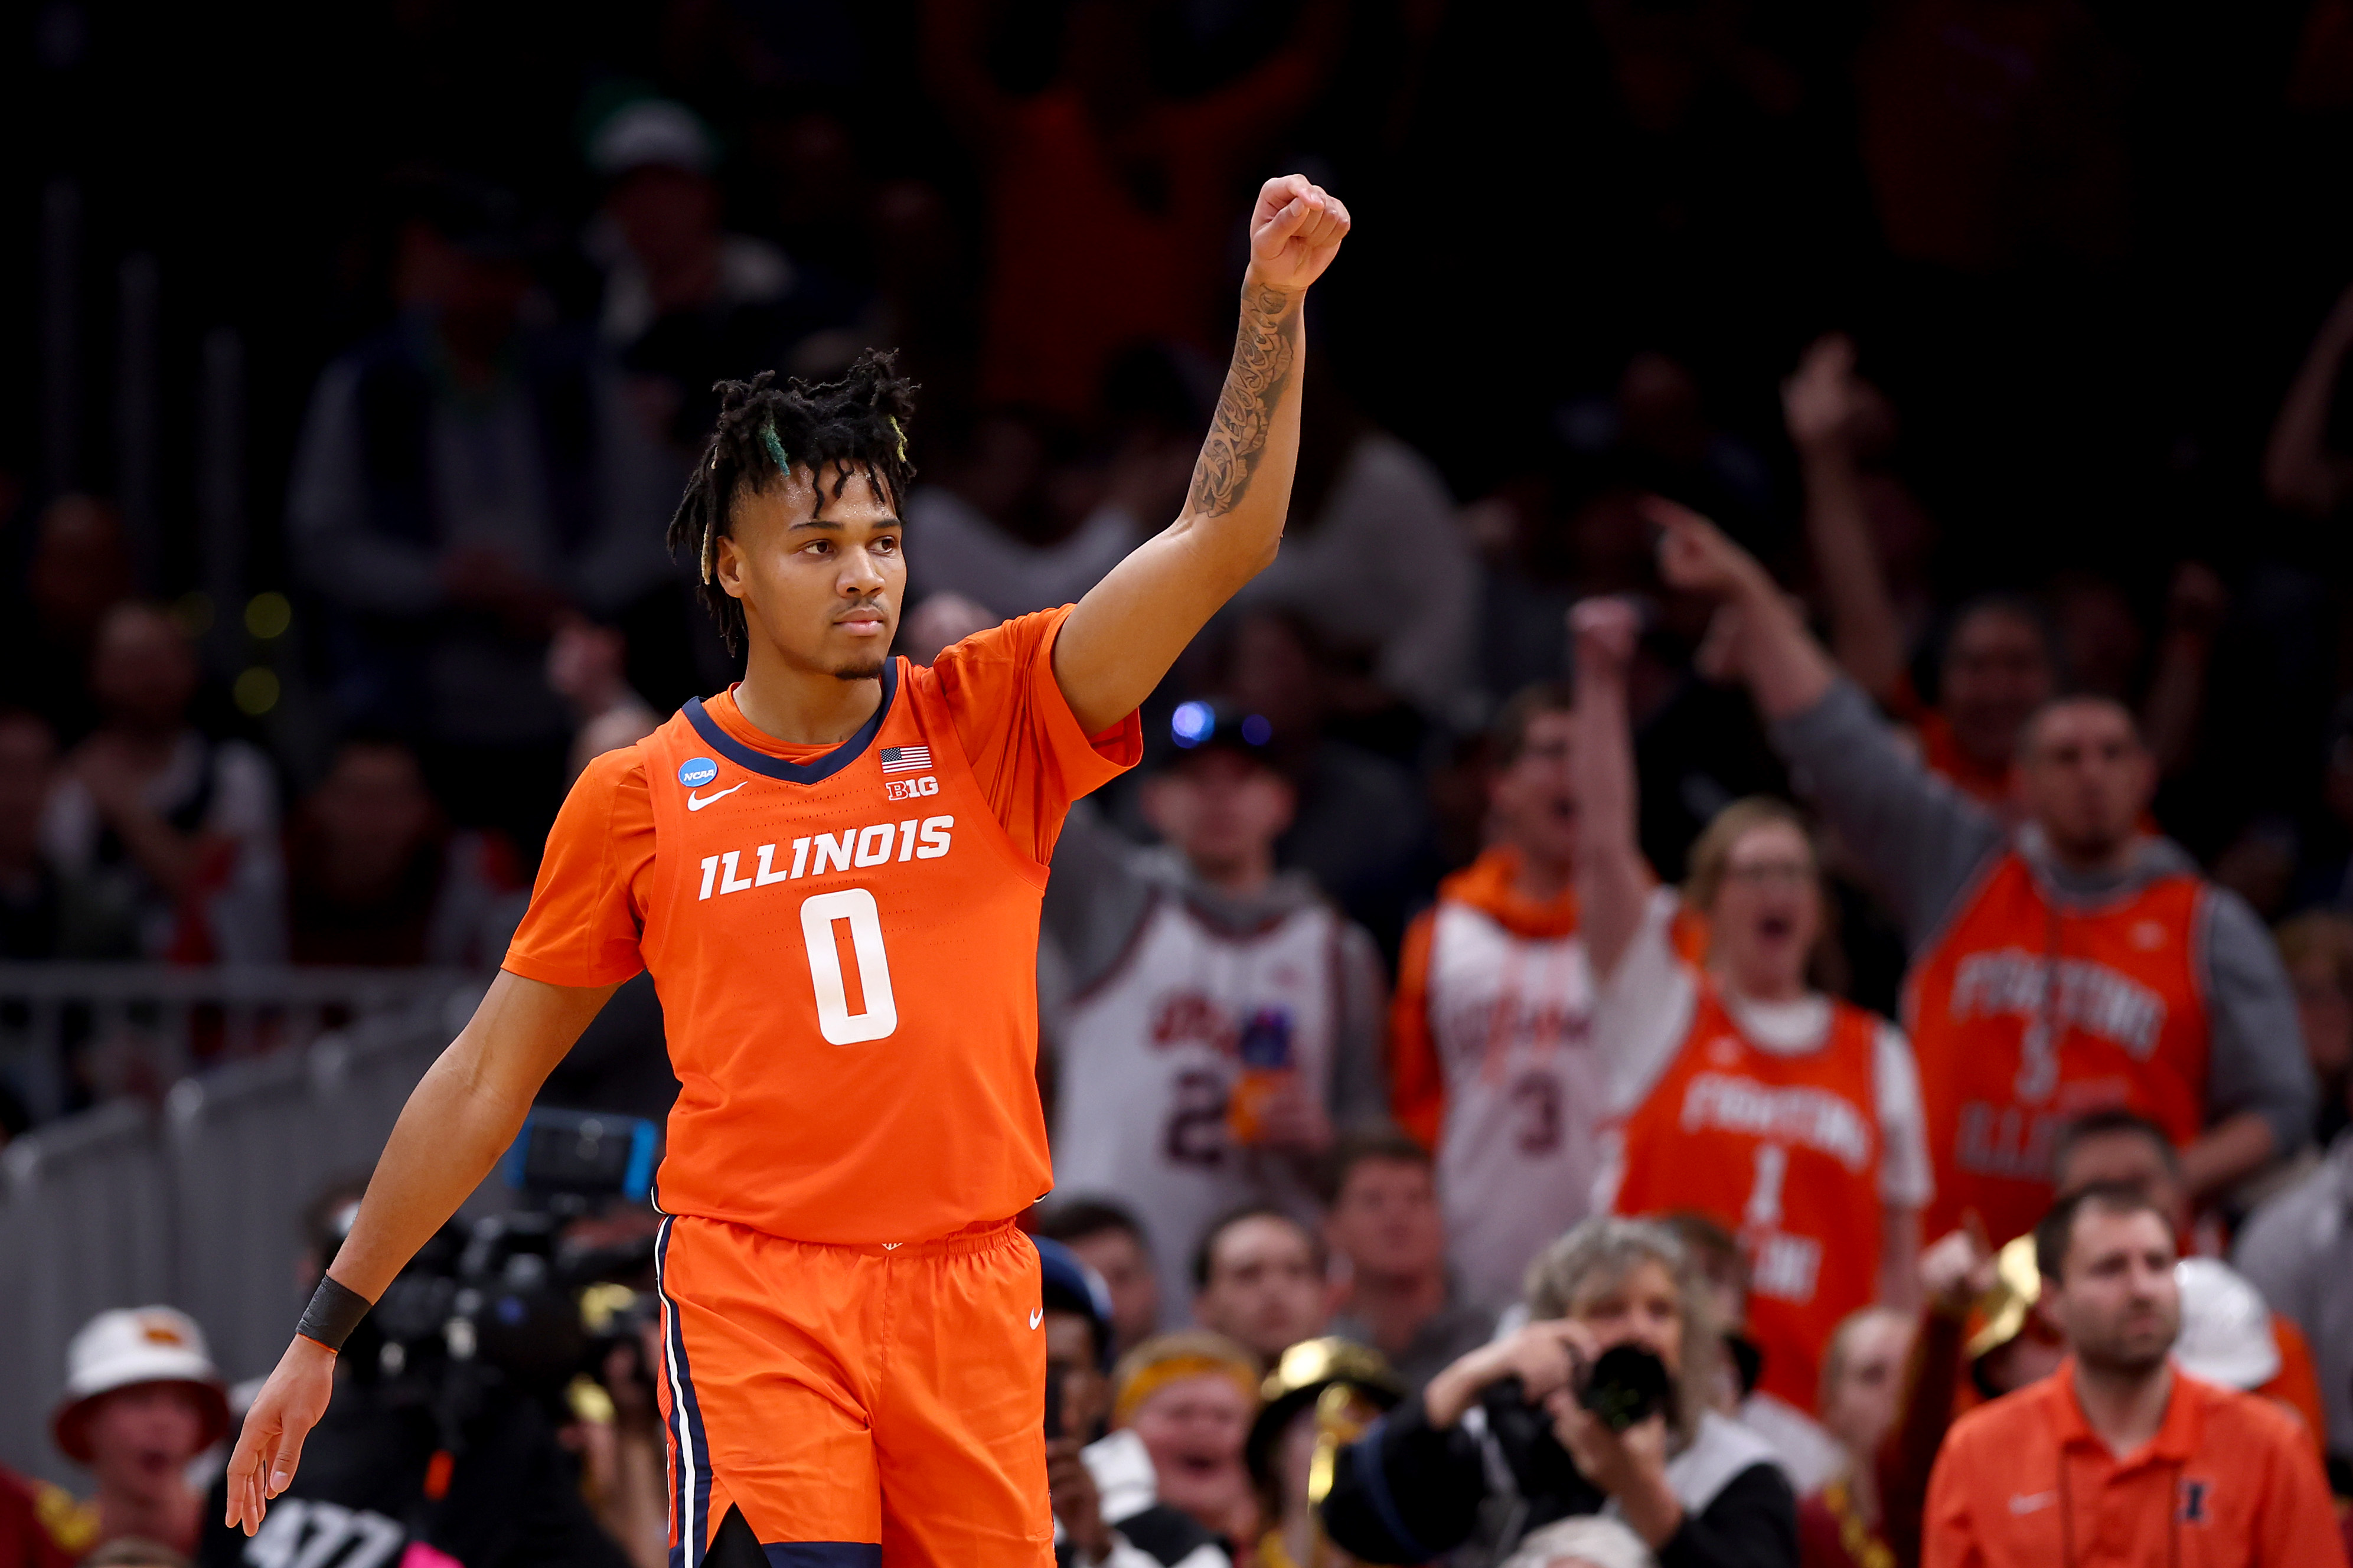 BOSTON, MASSACHUSETTS - MARCH 28: Terrence Shannon Jr. #0 of the Illinois Fighting Illini celebrates a basket against the Iowa State Cyclones during the first half in the Sweet 16 round of the NCAA Men's Basketball Tournament at TD Garden on March 28, 2024 in Boston, Massachusetts. (Photo by Maddie Meyer/Getty Images)